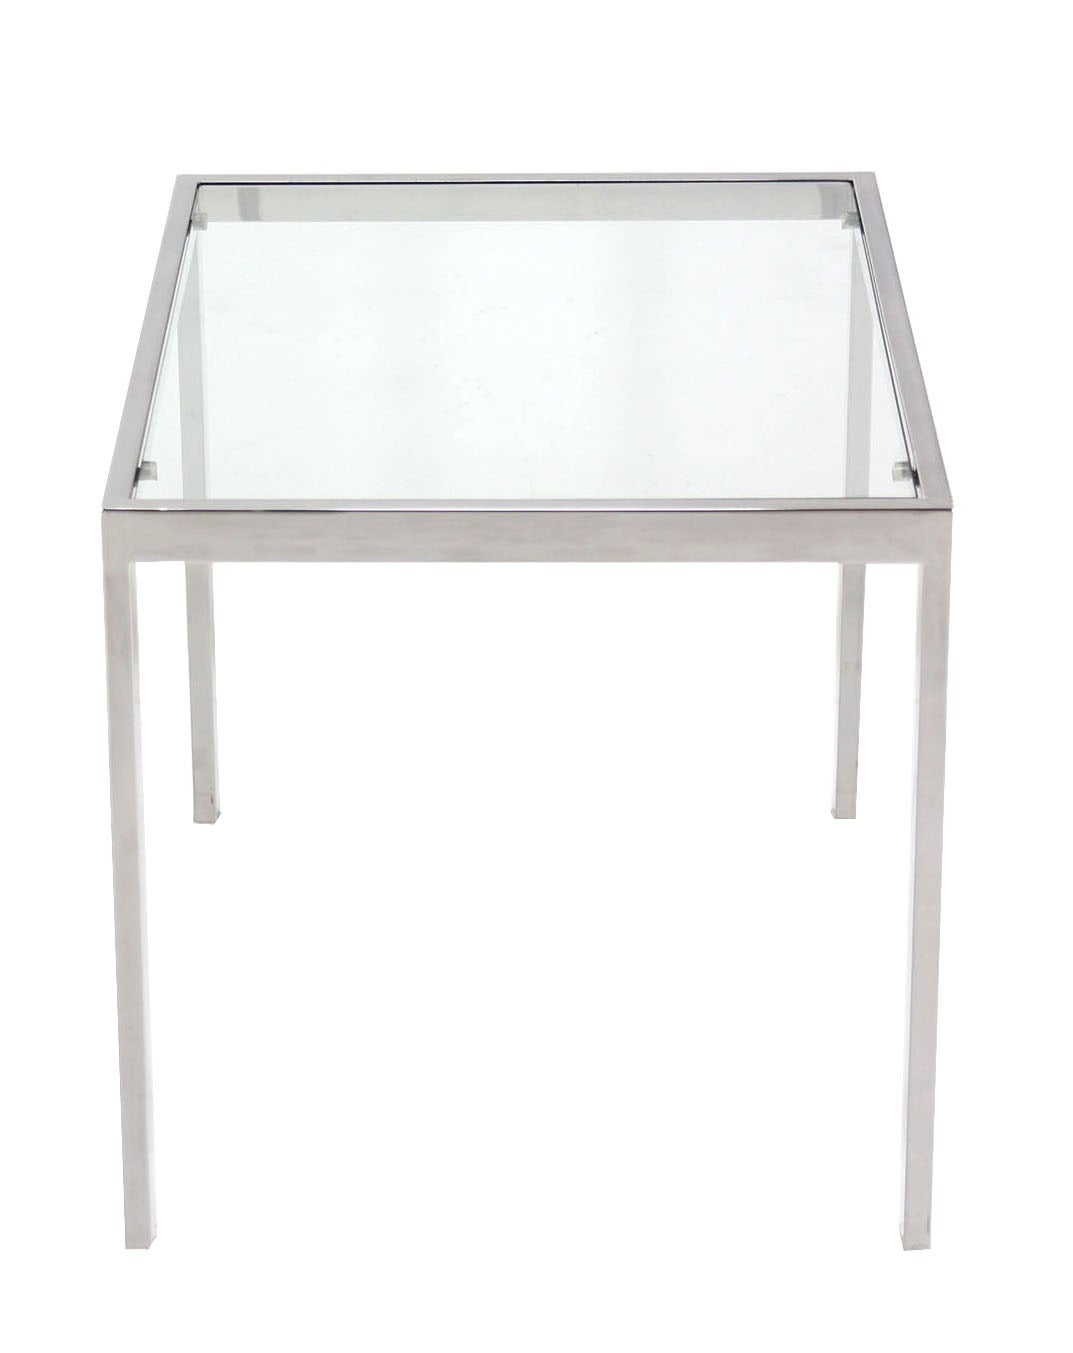 20th Century Chrome and Glass Mid-Century Modern Side Table